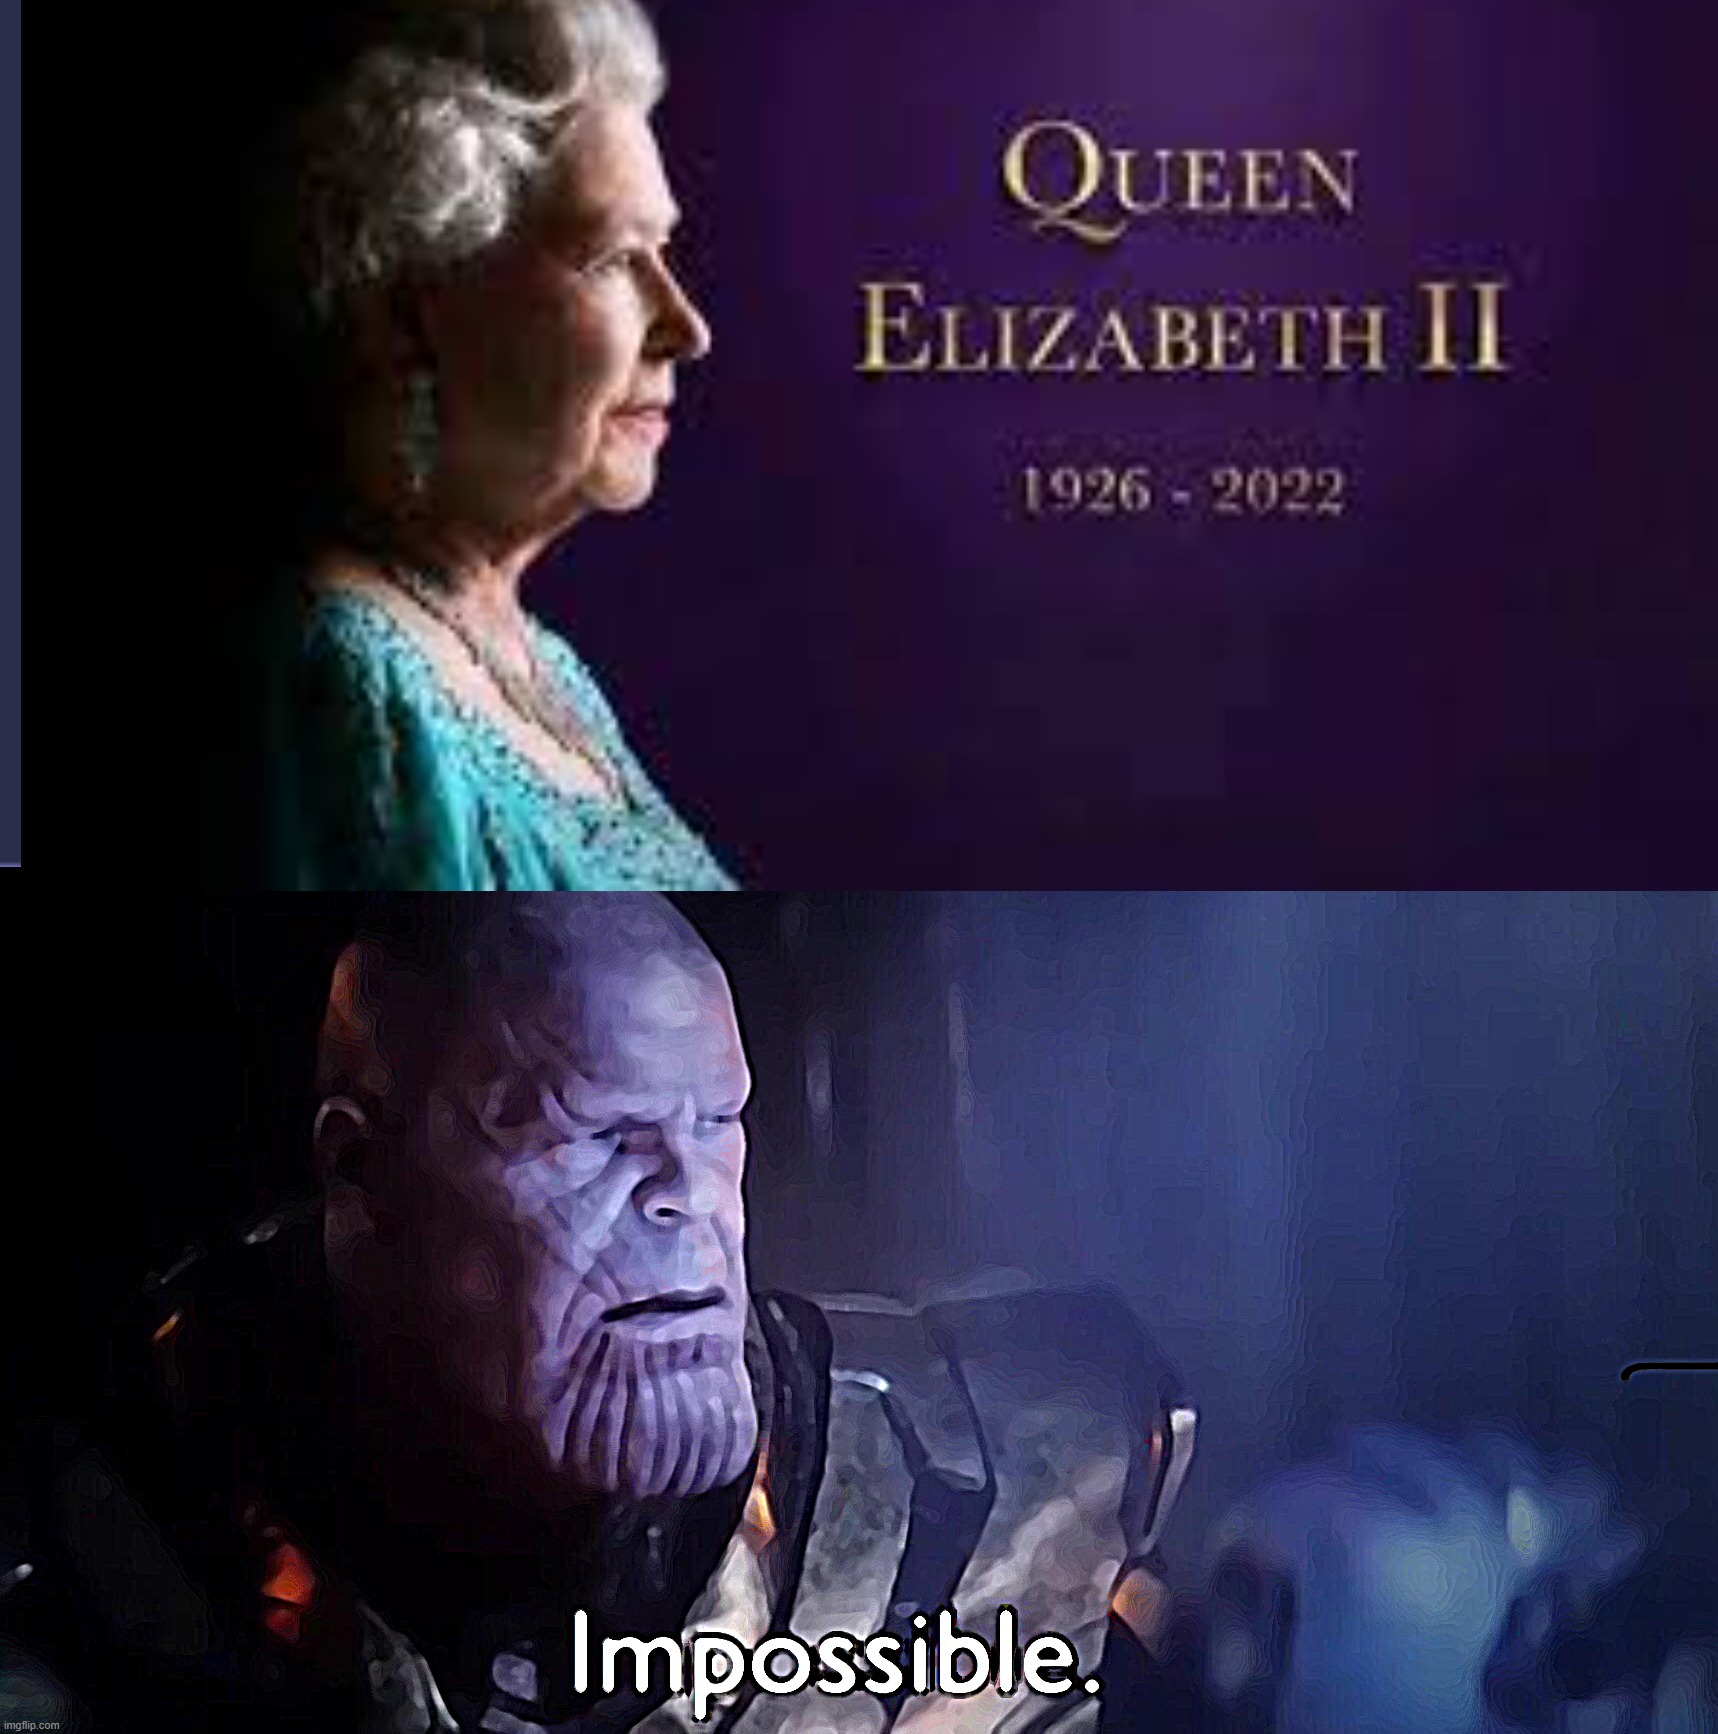 I WILL NOW BECOME POPULAR WITHTHIS STUPID MEME | image tagged in thanos impossible | made w/ Imgflip meme maker